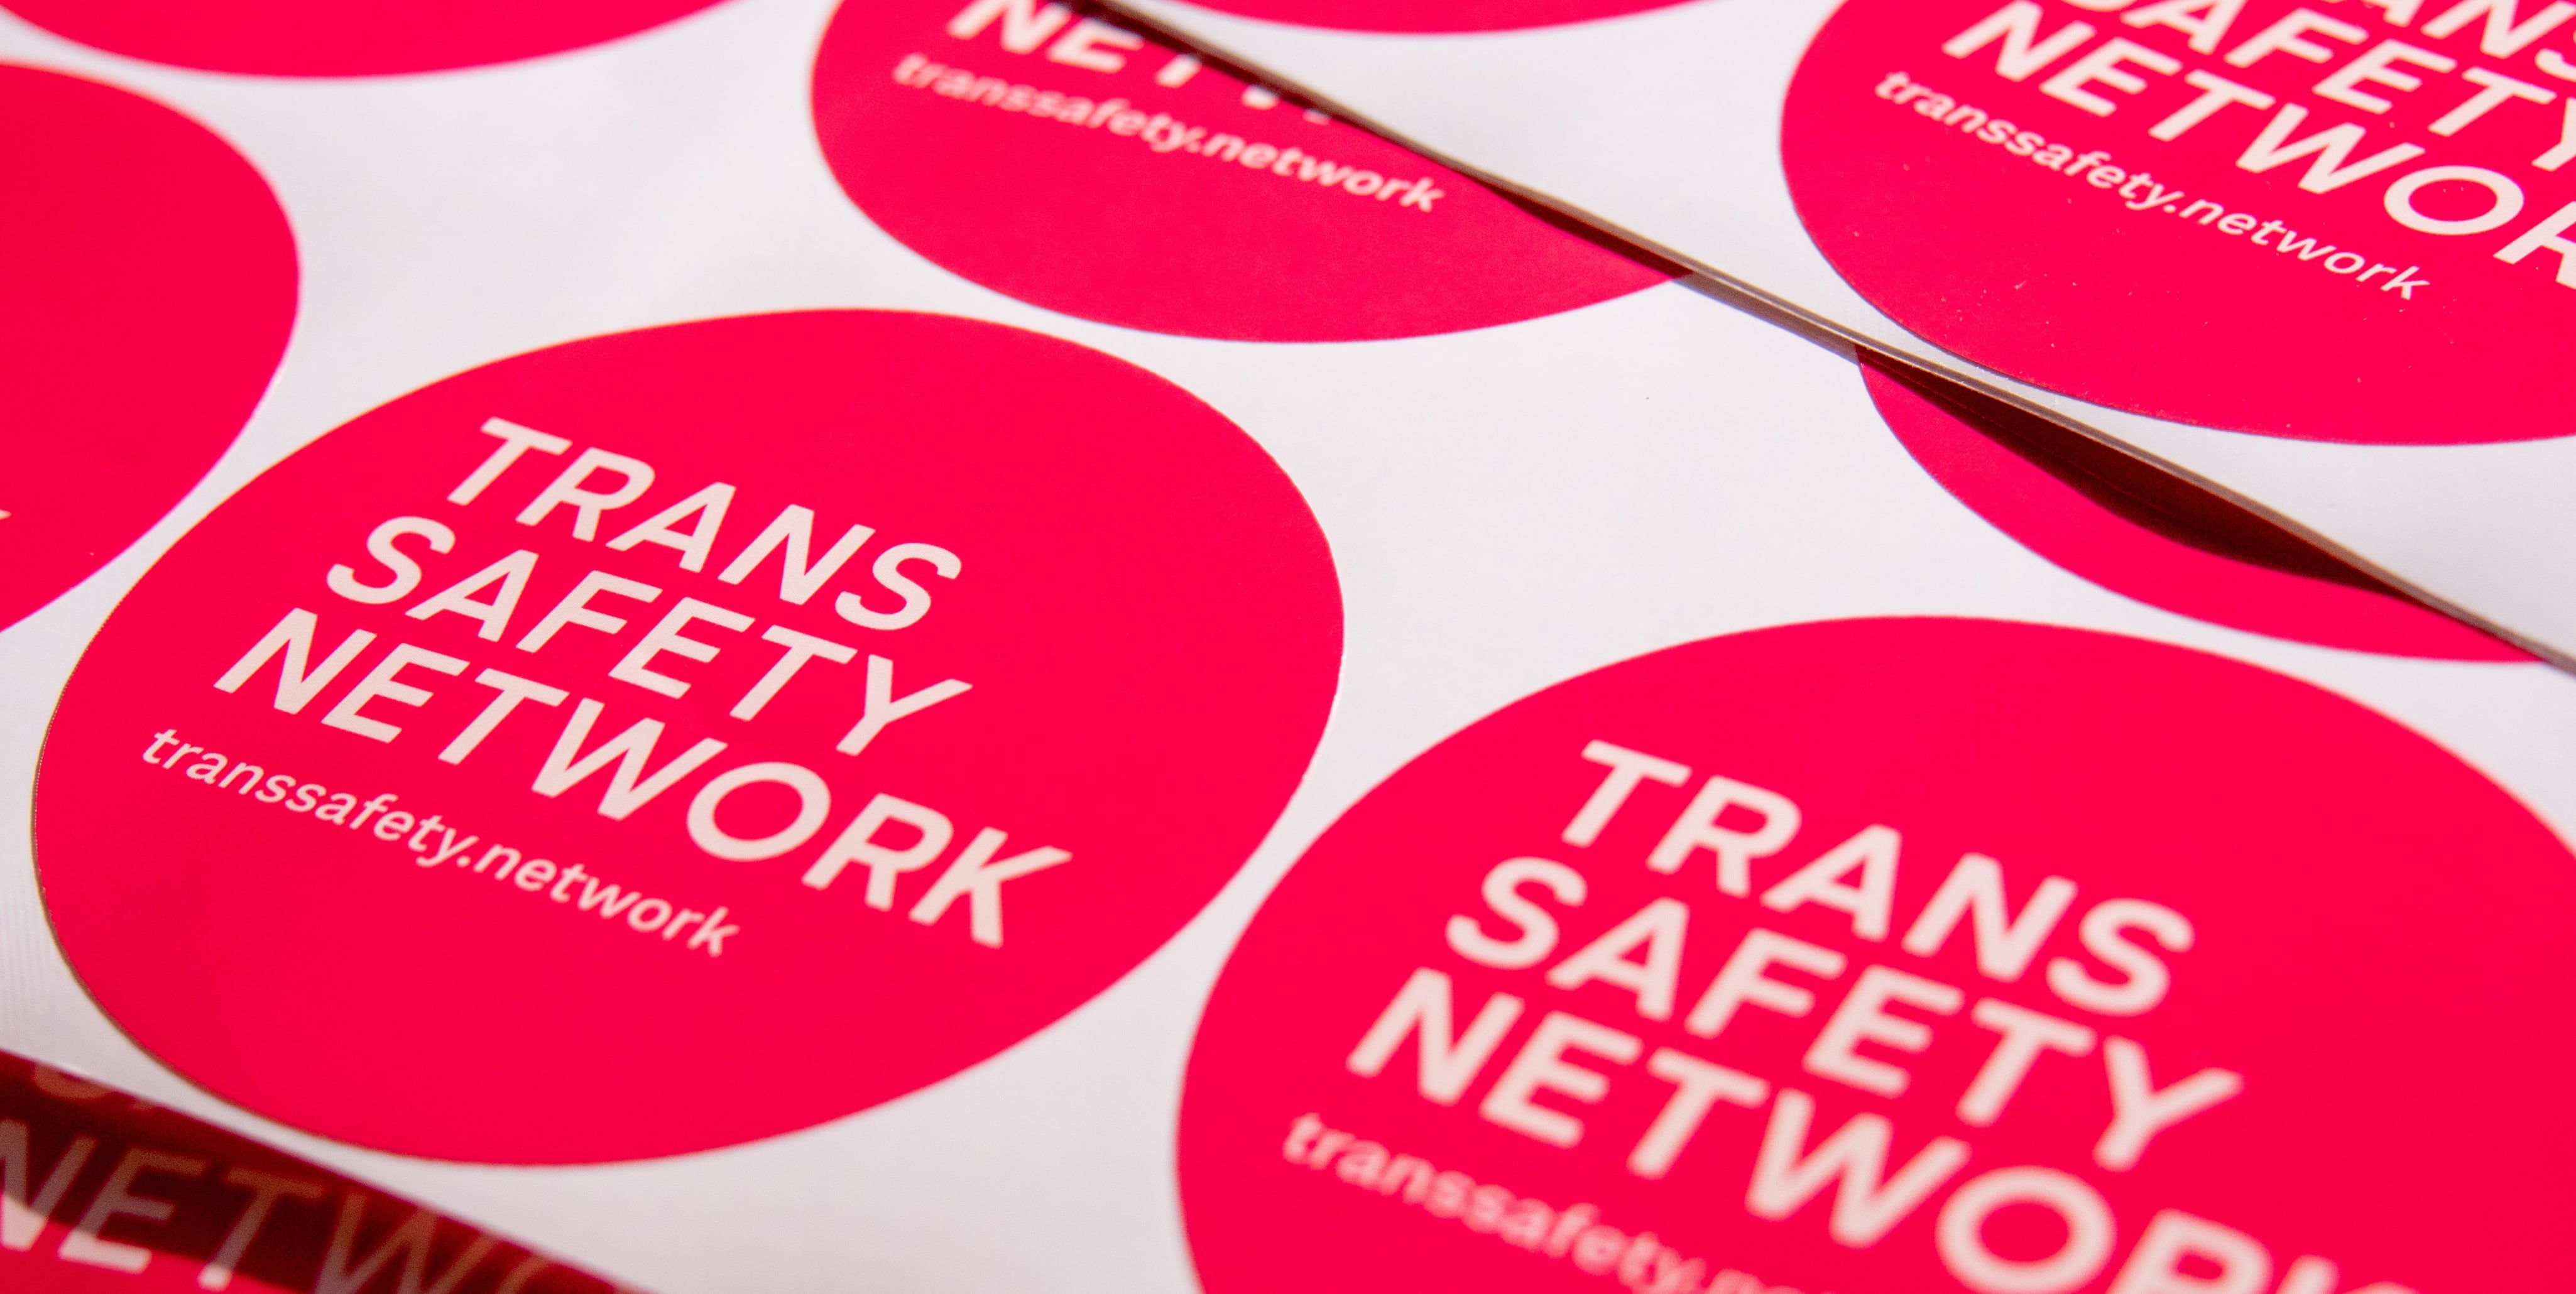 A close up photo of the Trans Safety Network logo in white text on round, pink, stickers